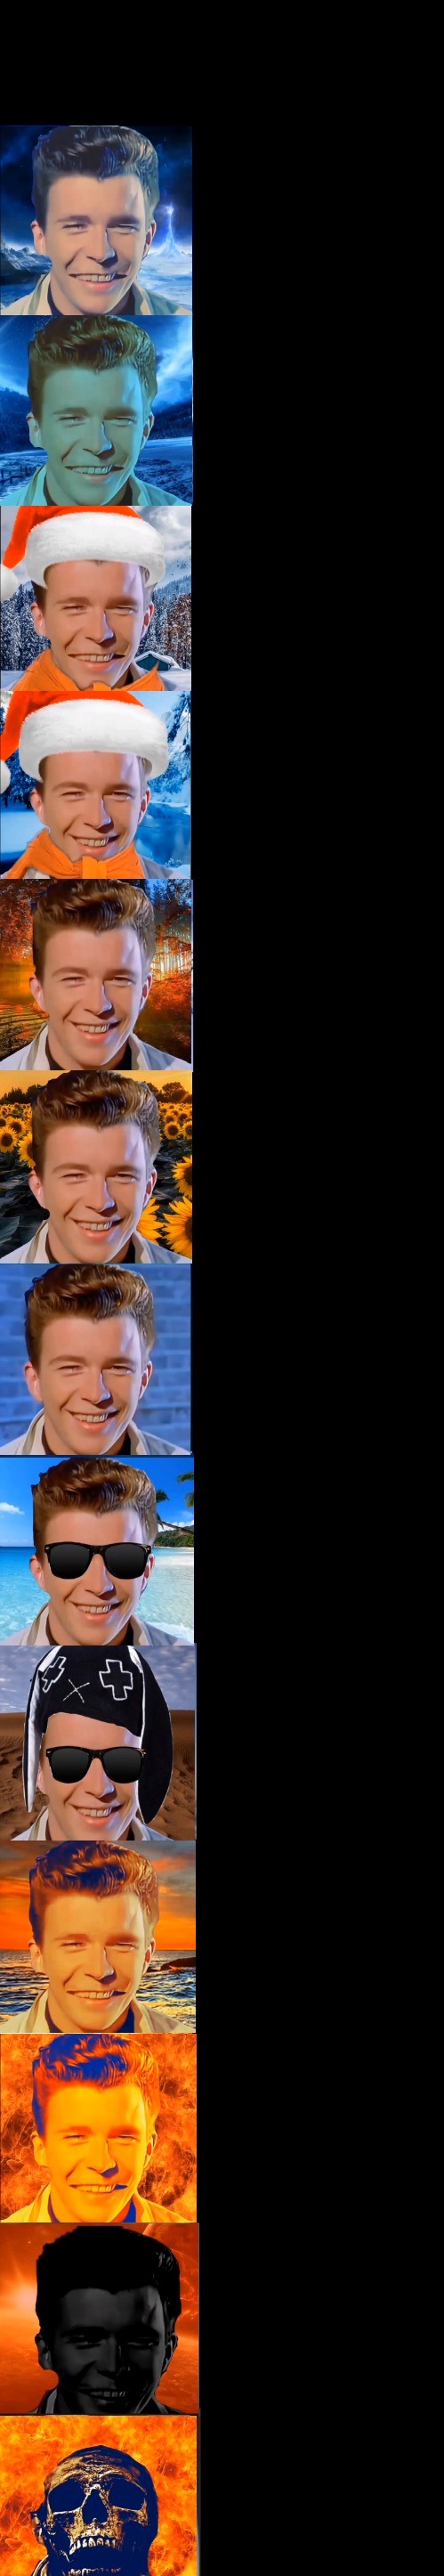 Rick astley becoming cold to hot Blank Meme Template